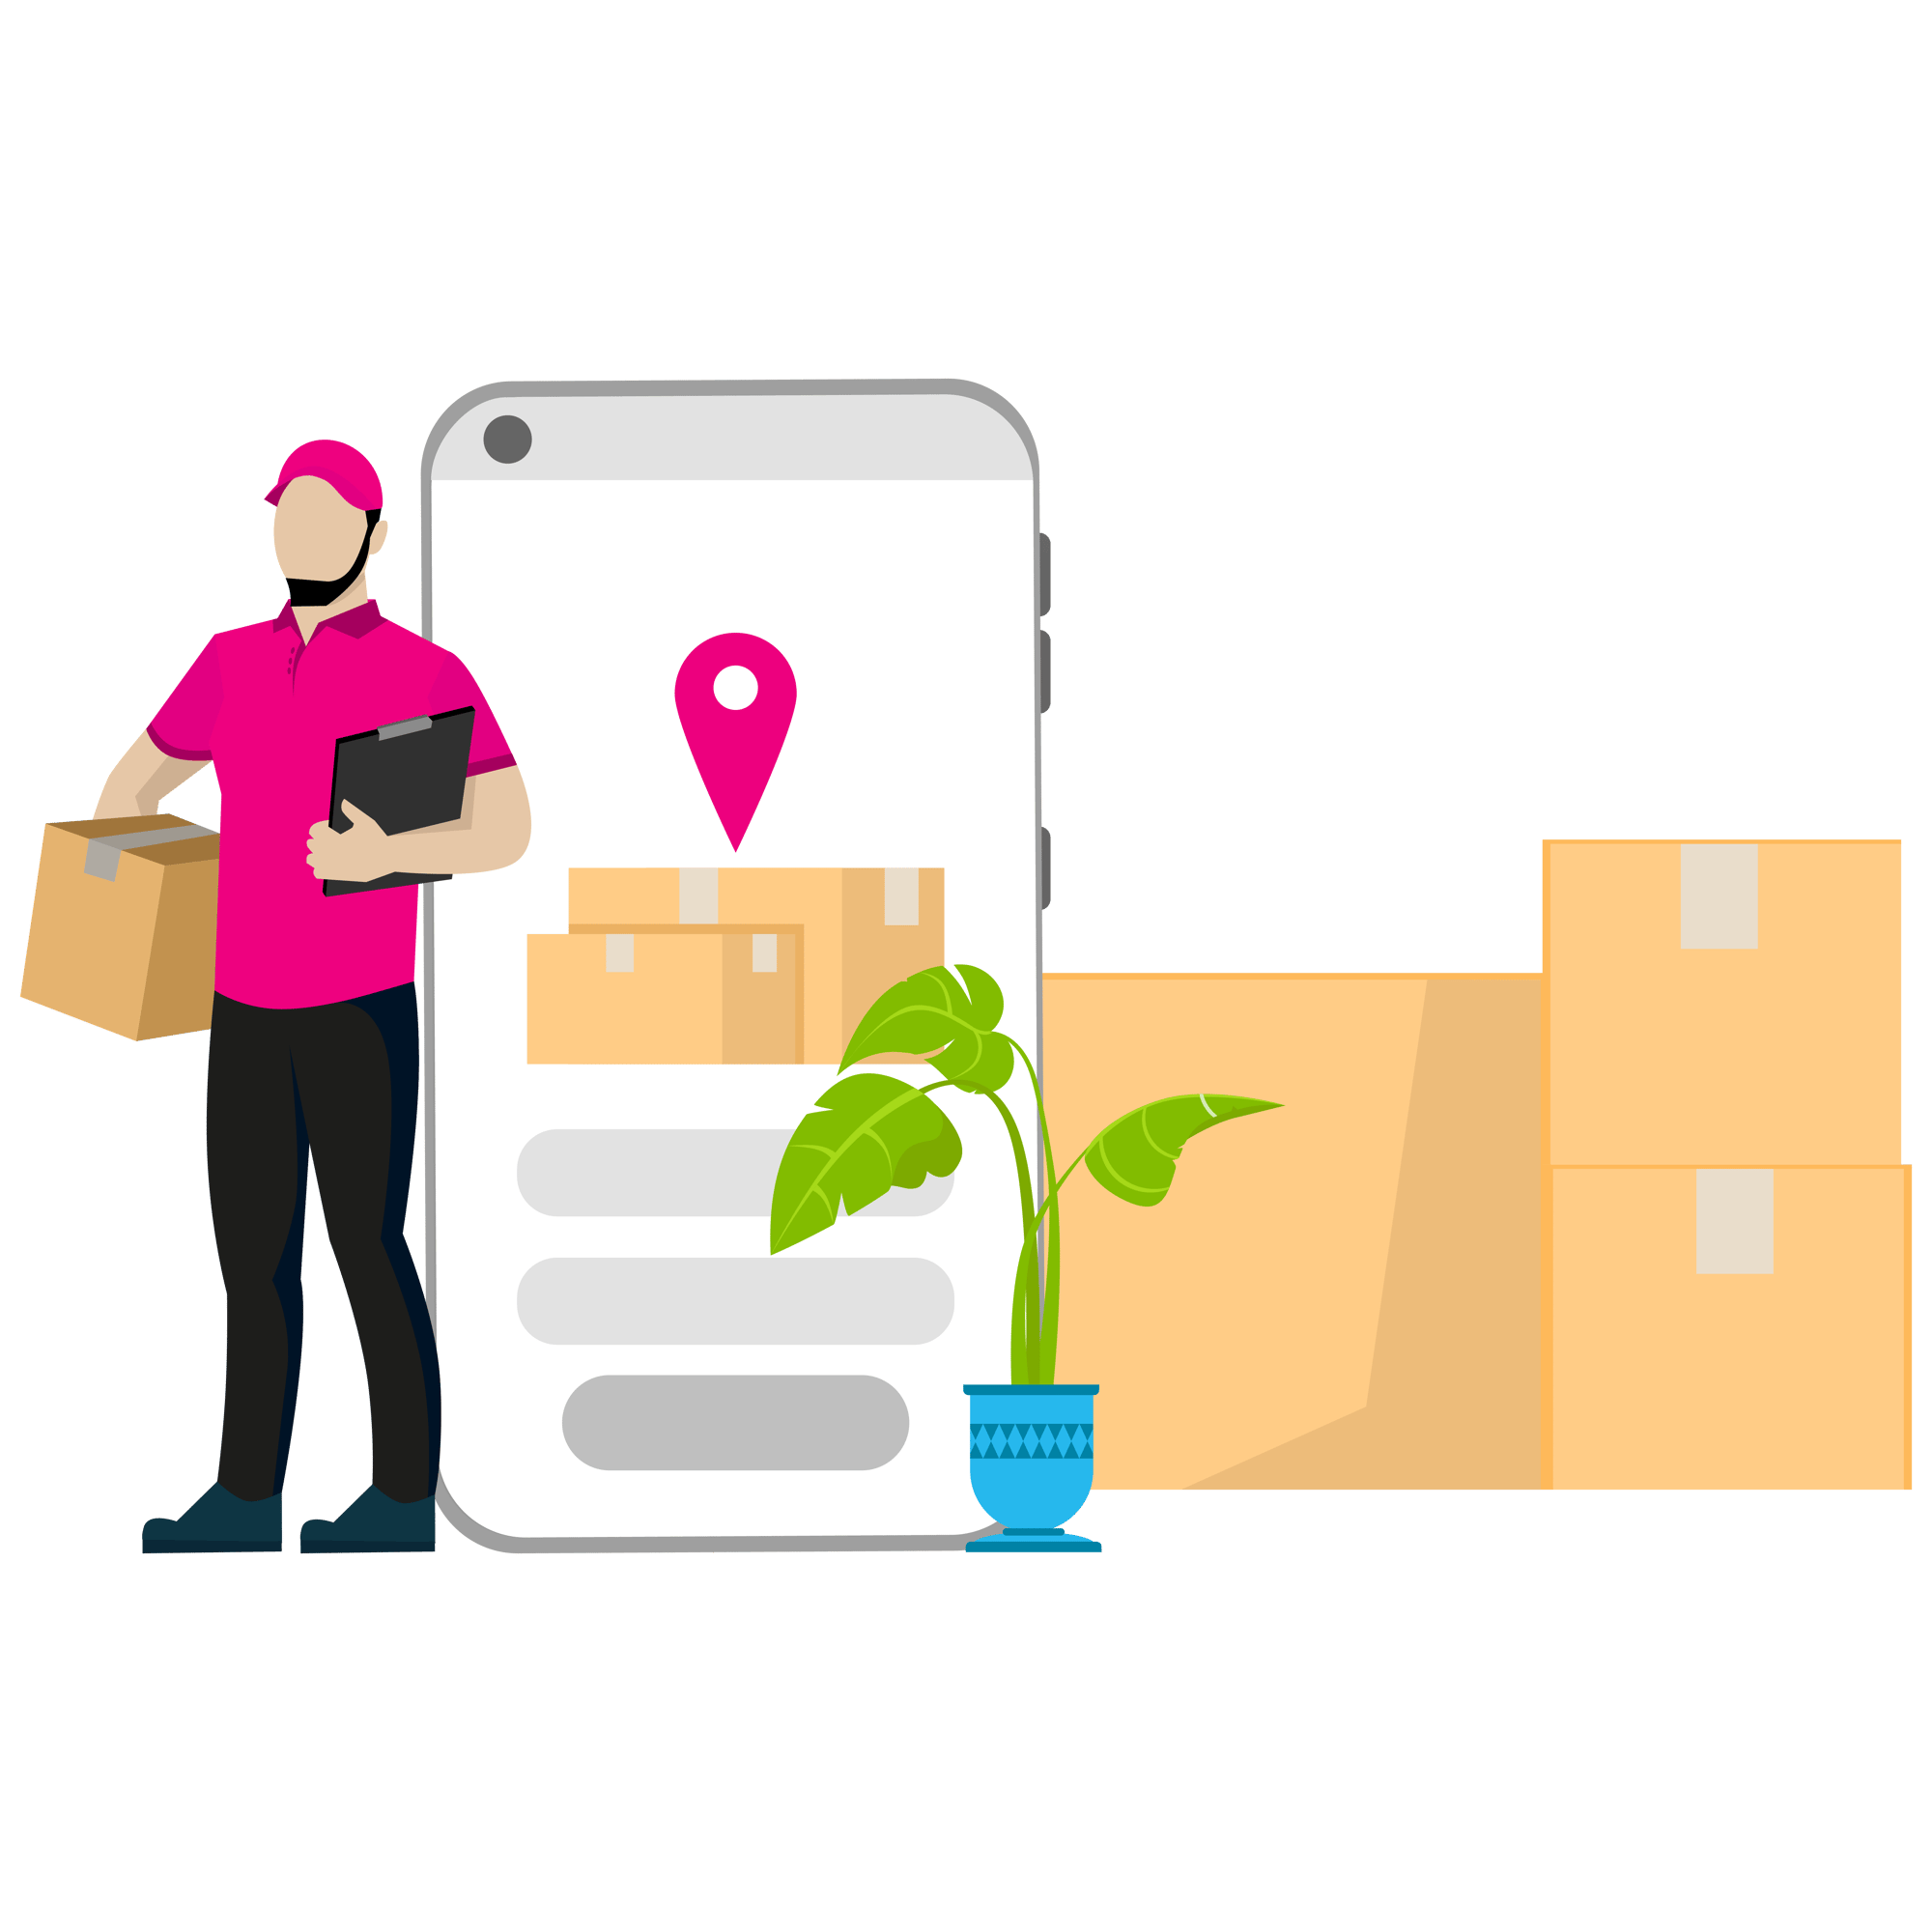 A diagram of a man holding a box and clipboard, next to a lifesize smartphone and boxes on the side and a pot plant infront of it.